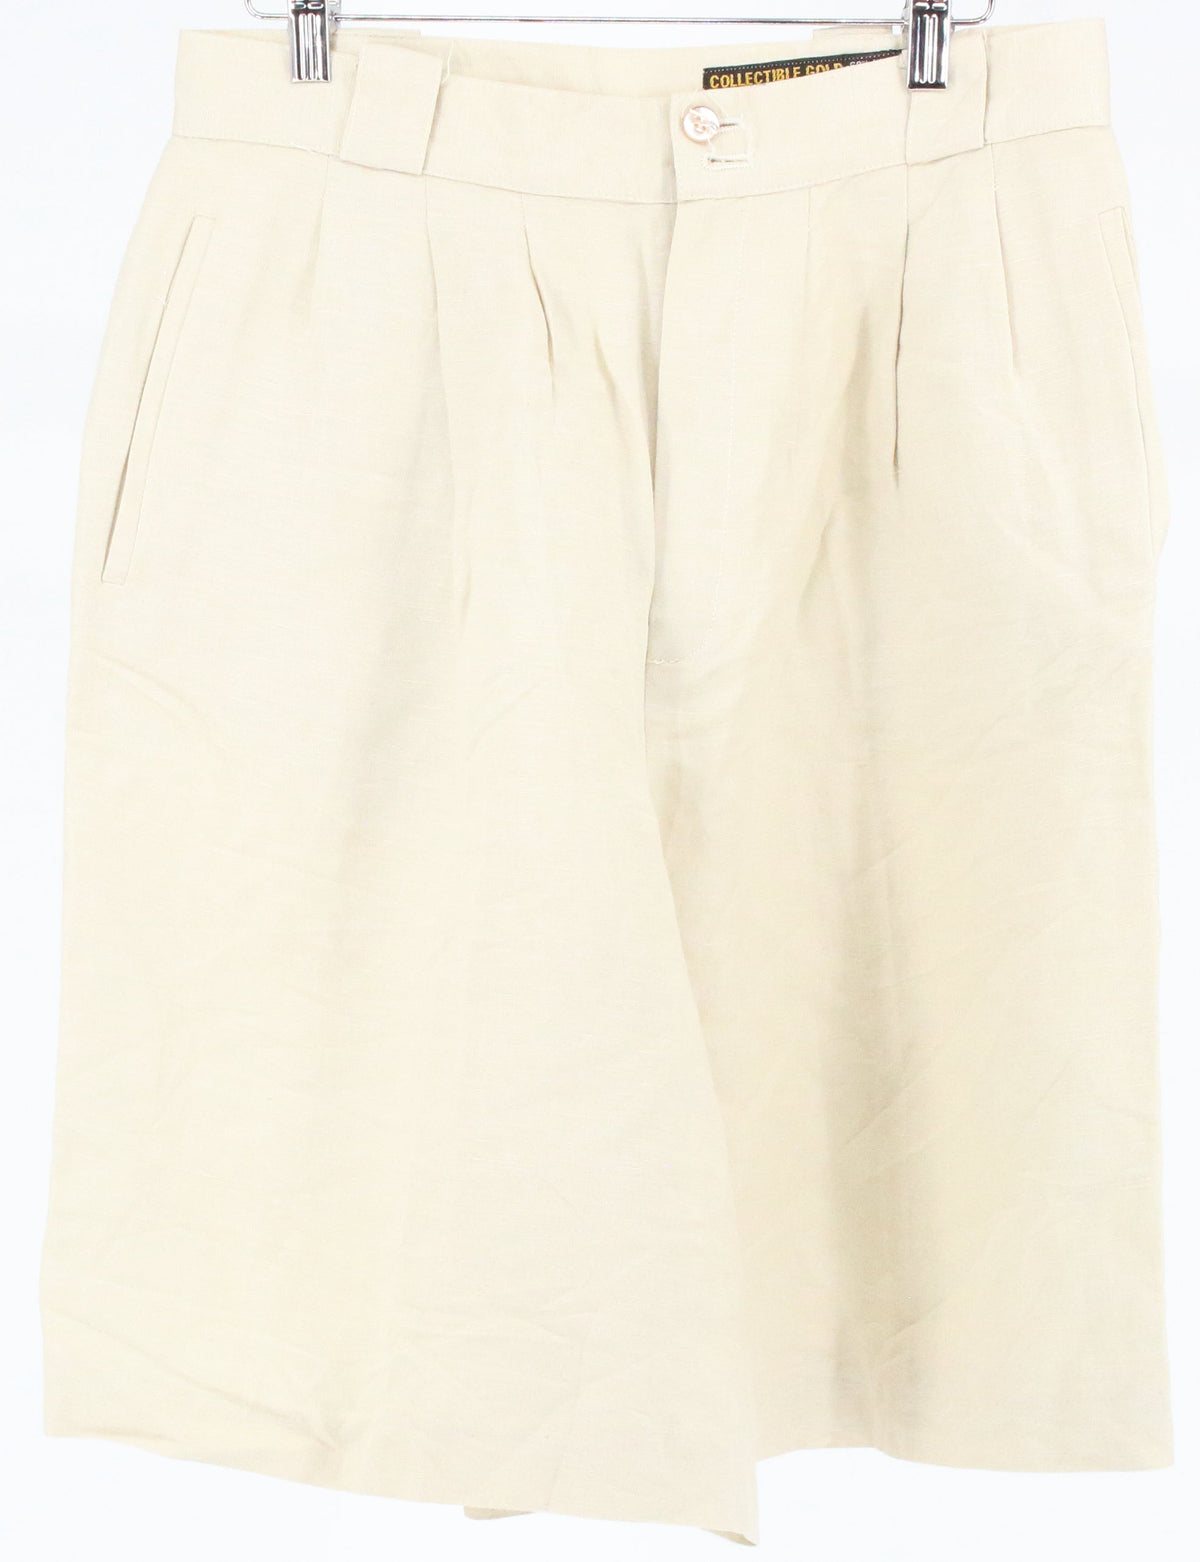 Collectible Gold Beige High Waisted Pleated Shorts